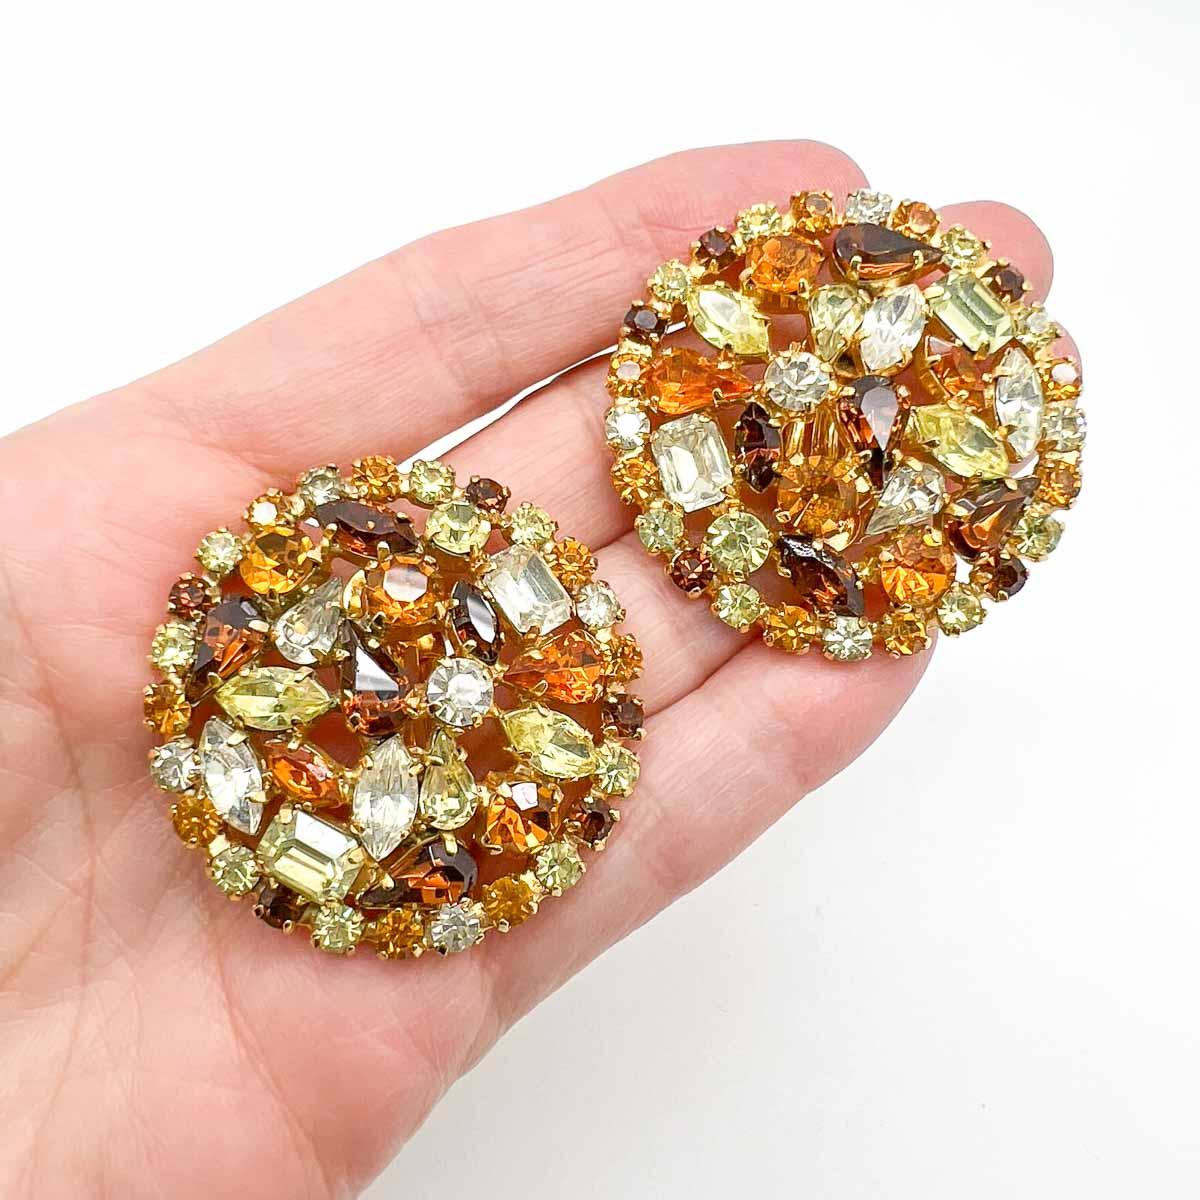 Stunning Vintage Fancy Cut Topaz Earrings. A wonderfully generous sized disc is set individually with a myriad of fancy cut crystals emulating precious stones including topaz and citrine. Add for a pure statement of glamour and timeless